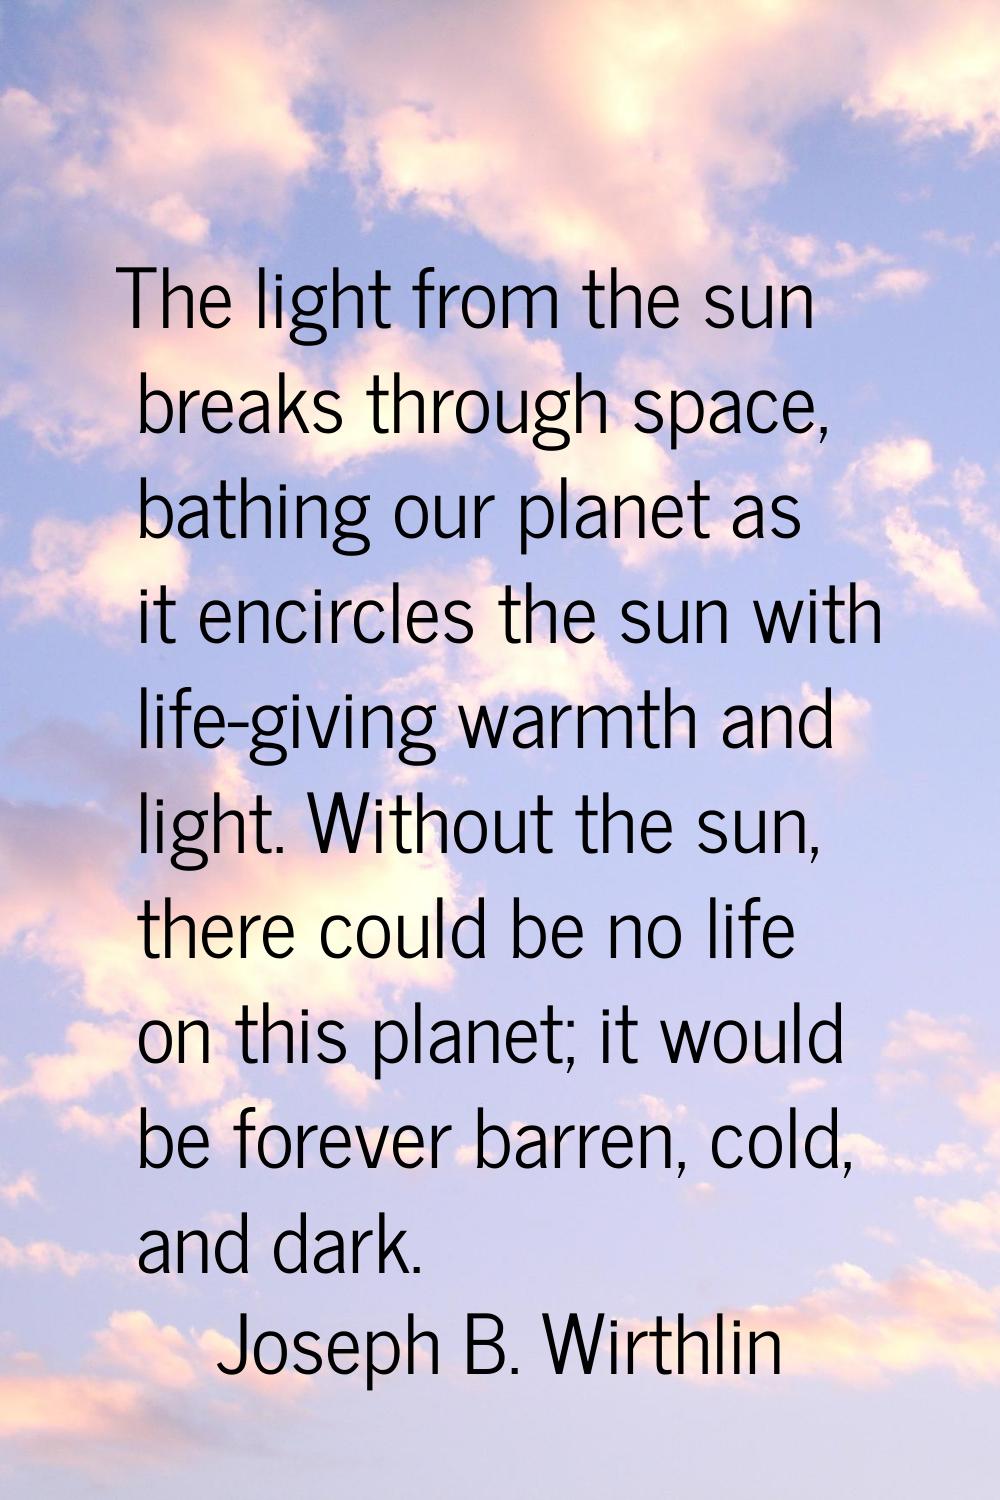 The light from the sun breaks through space, bathing our planet as it encircles the sun with life-g